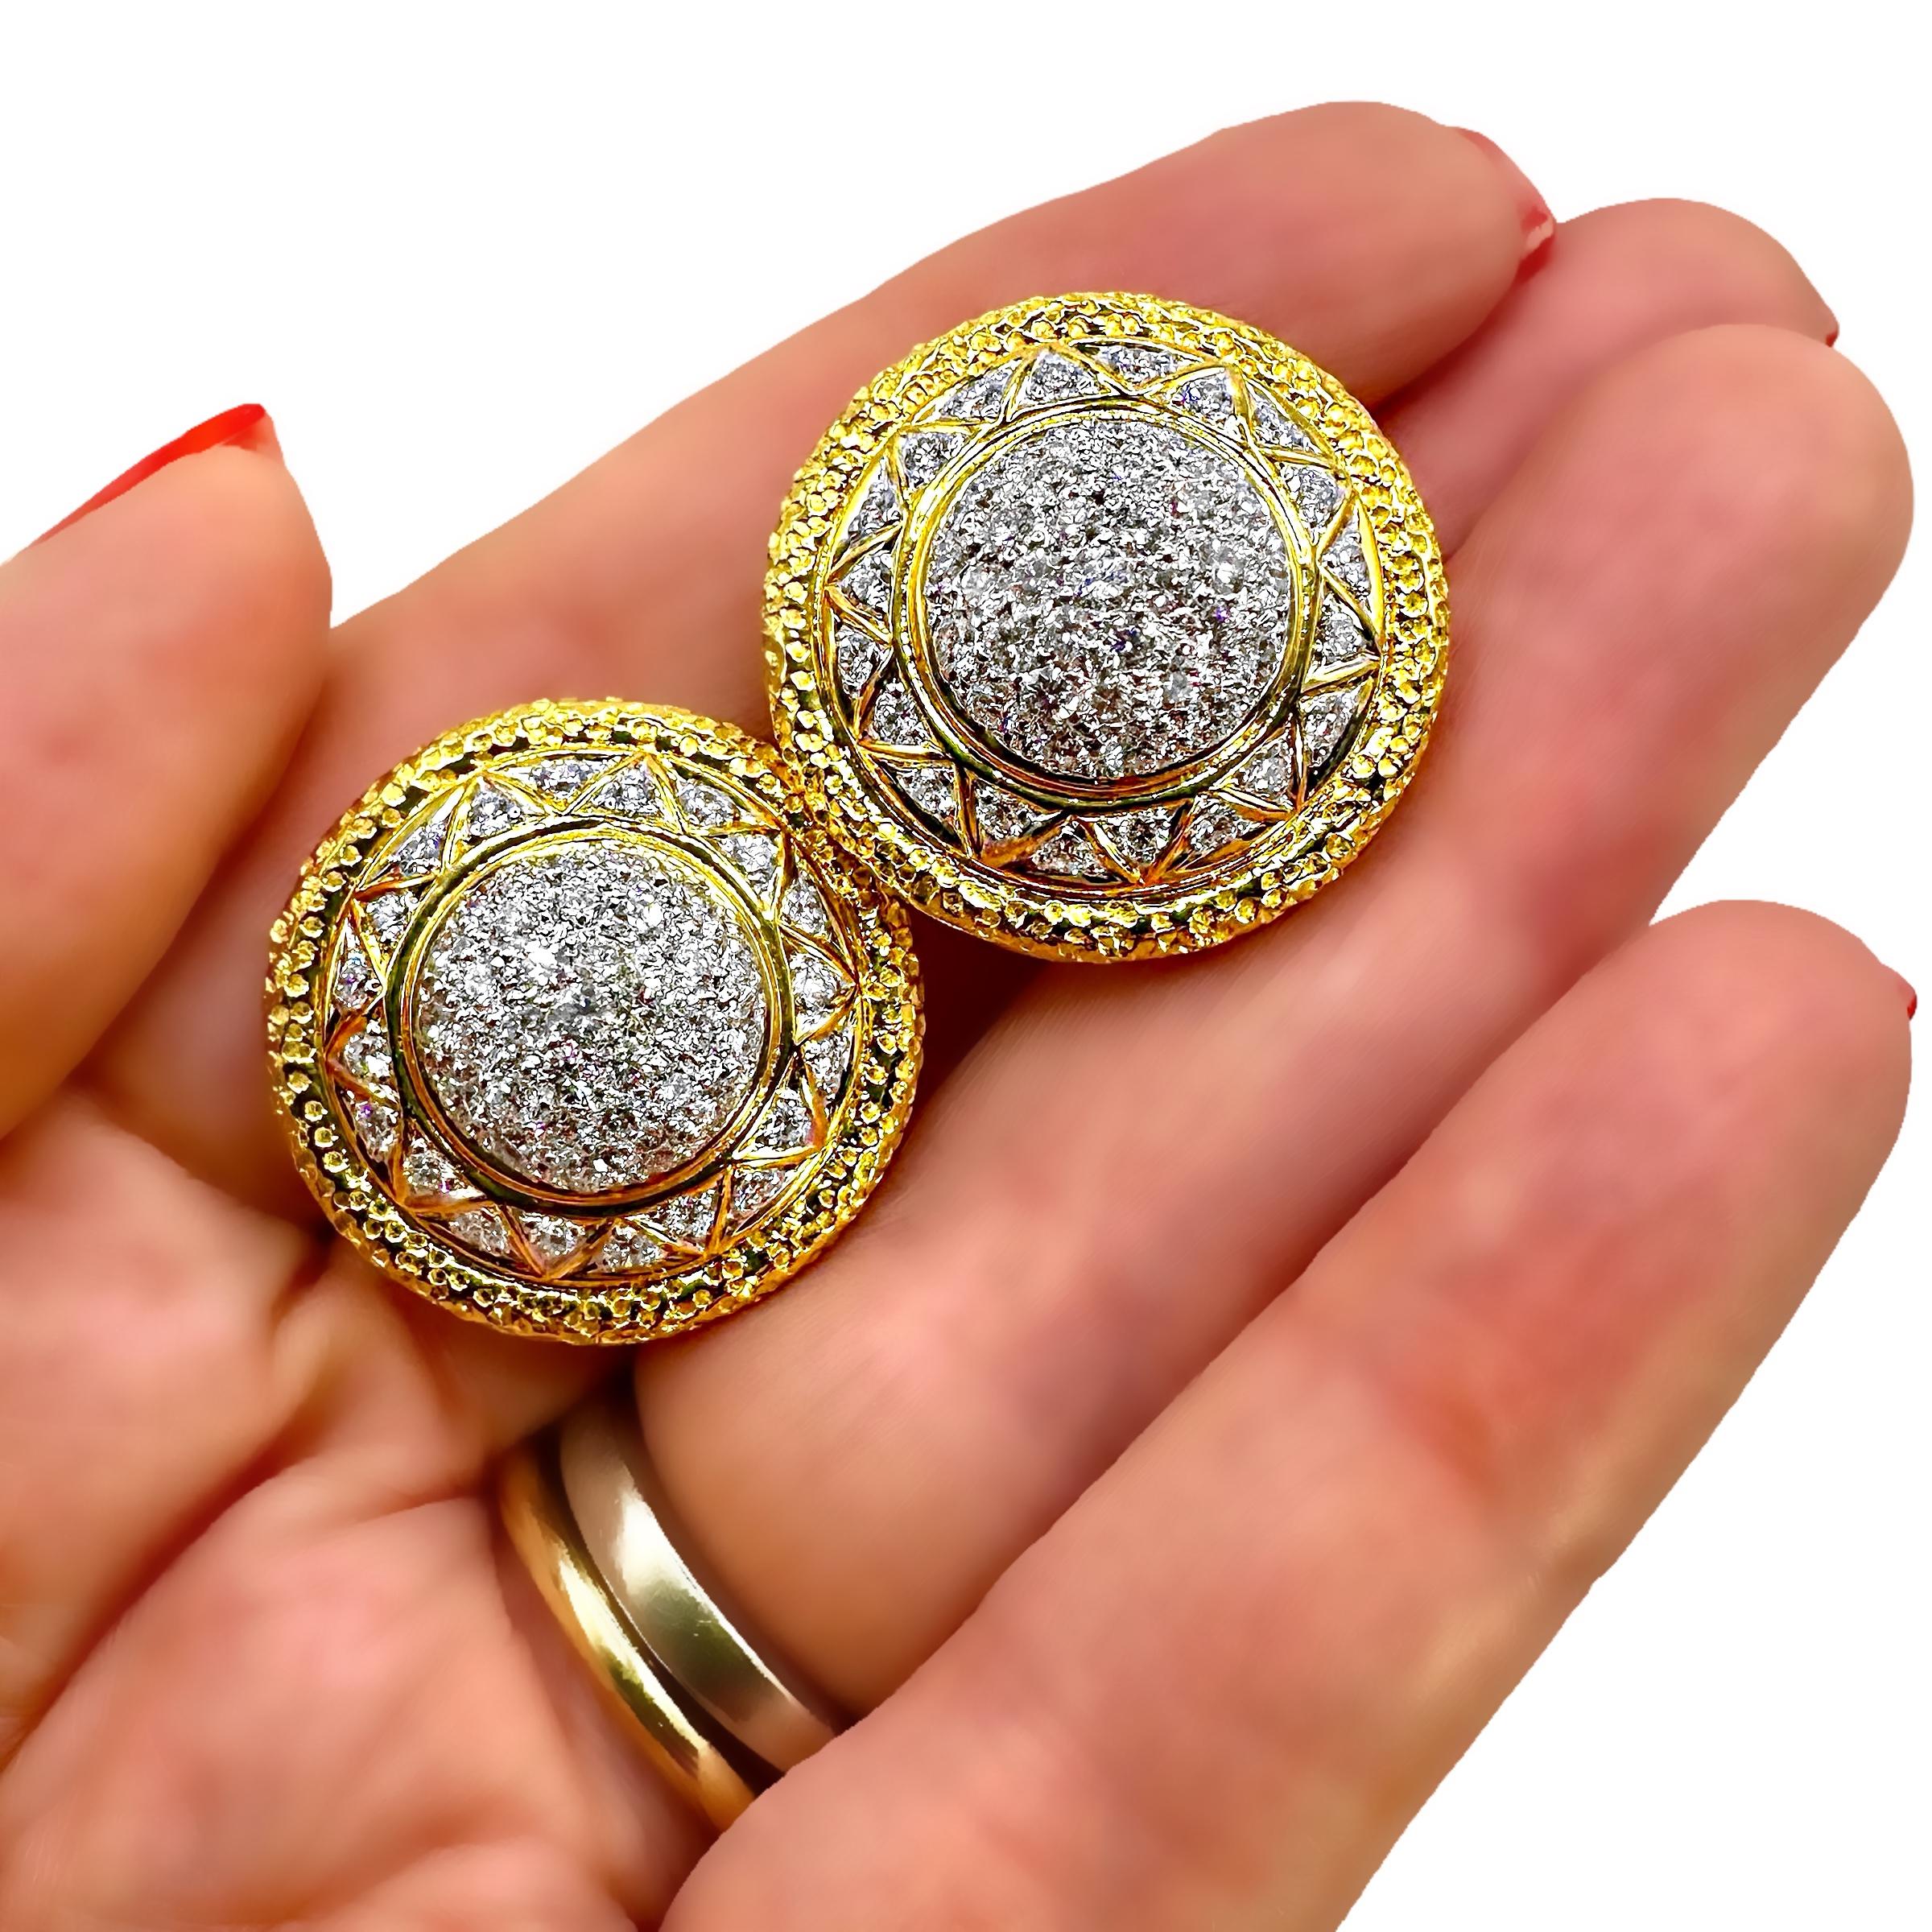 18K Stylish & Tailored Gold & Diamond Encrusted Dome Earrings 7/8 Inch Diameter For Sale 4